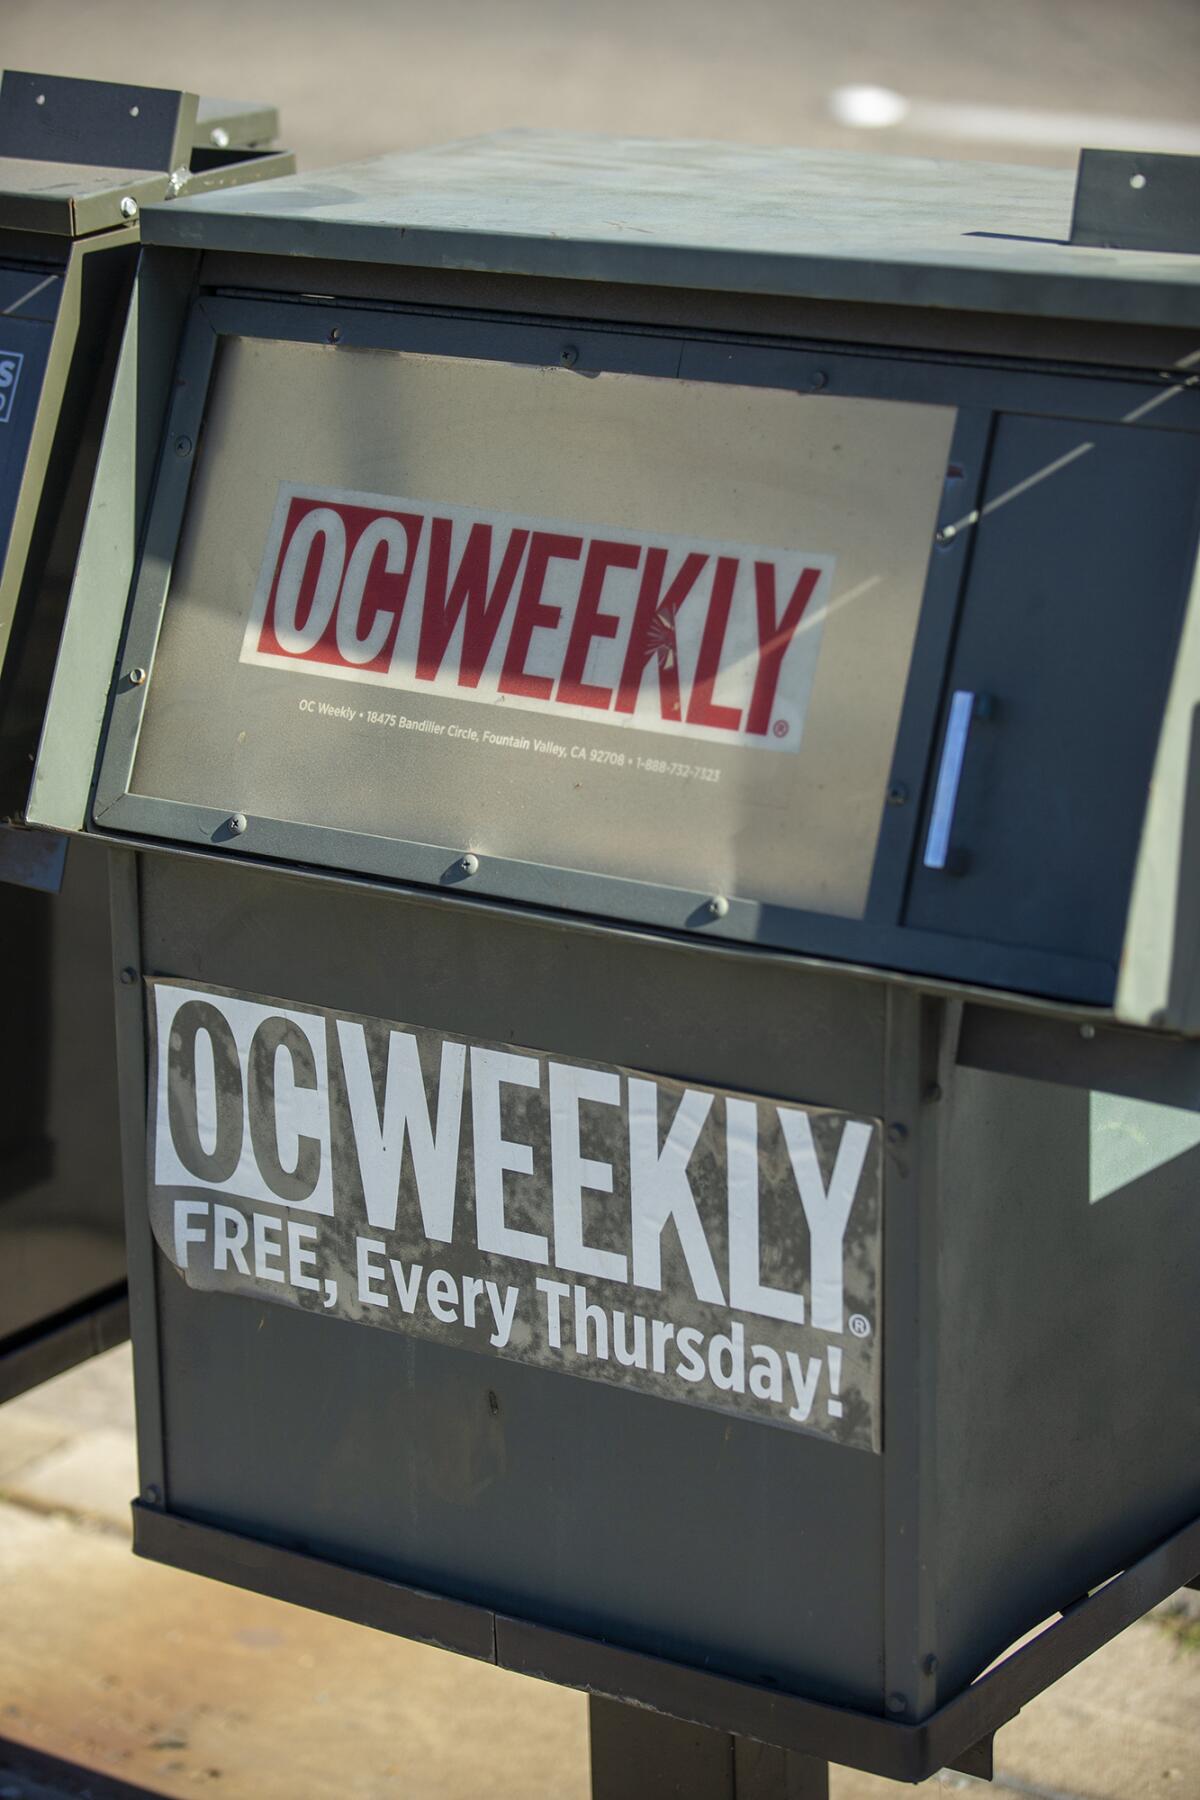 A rare OC Weekly street rack in Anaheim has remained empty since the newspaper's closure in late 2019.